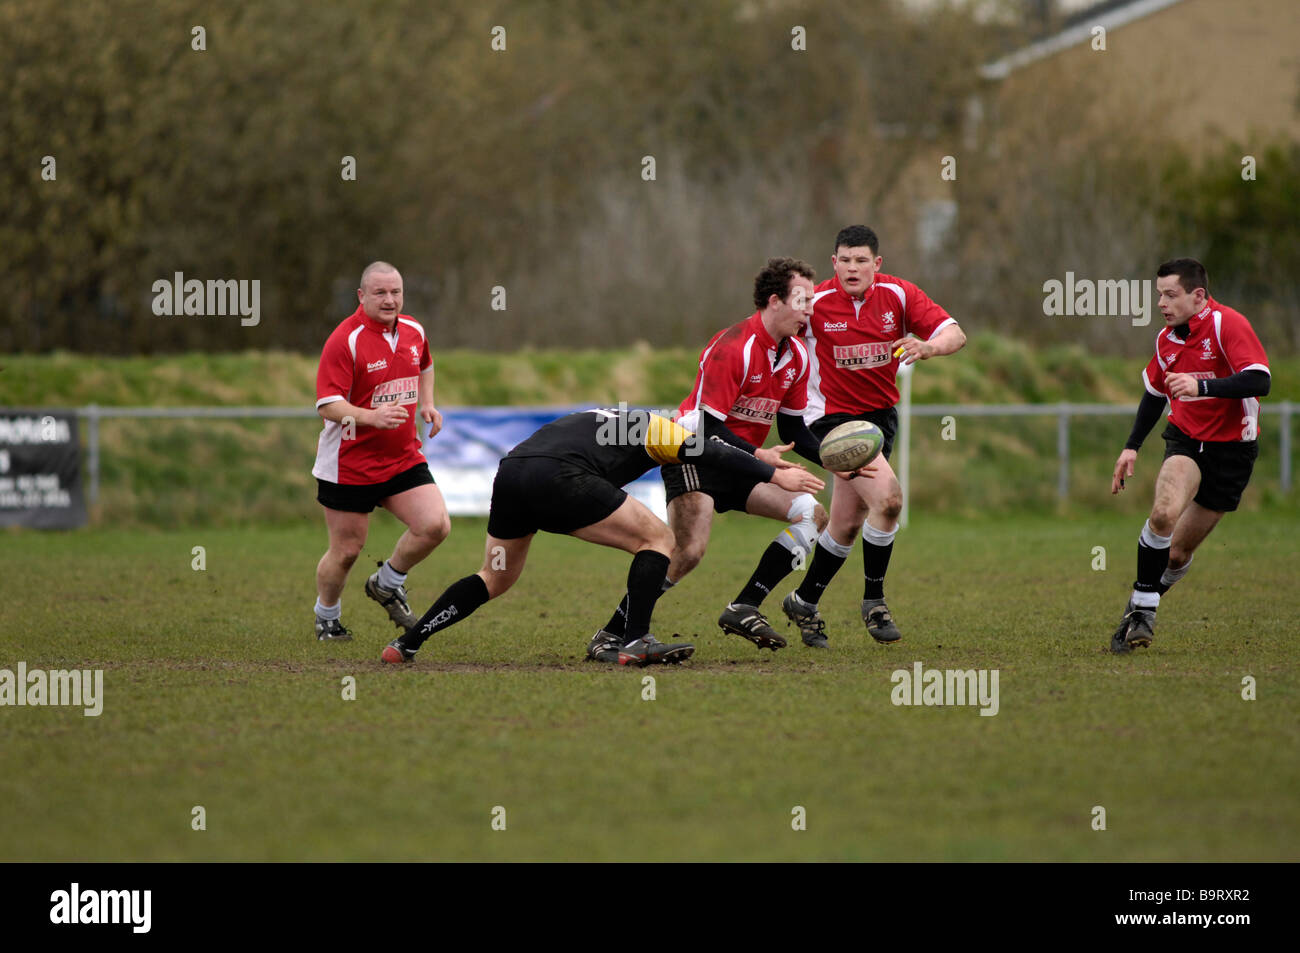 rugby player passing the ball as he is tackled Stock Photo